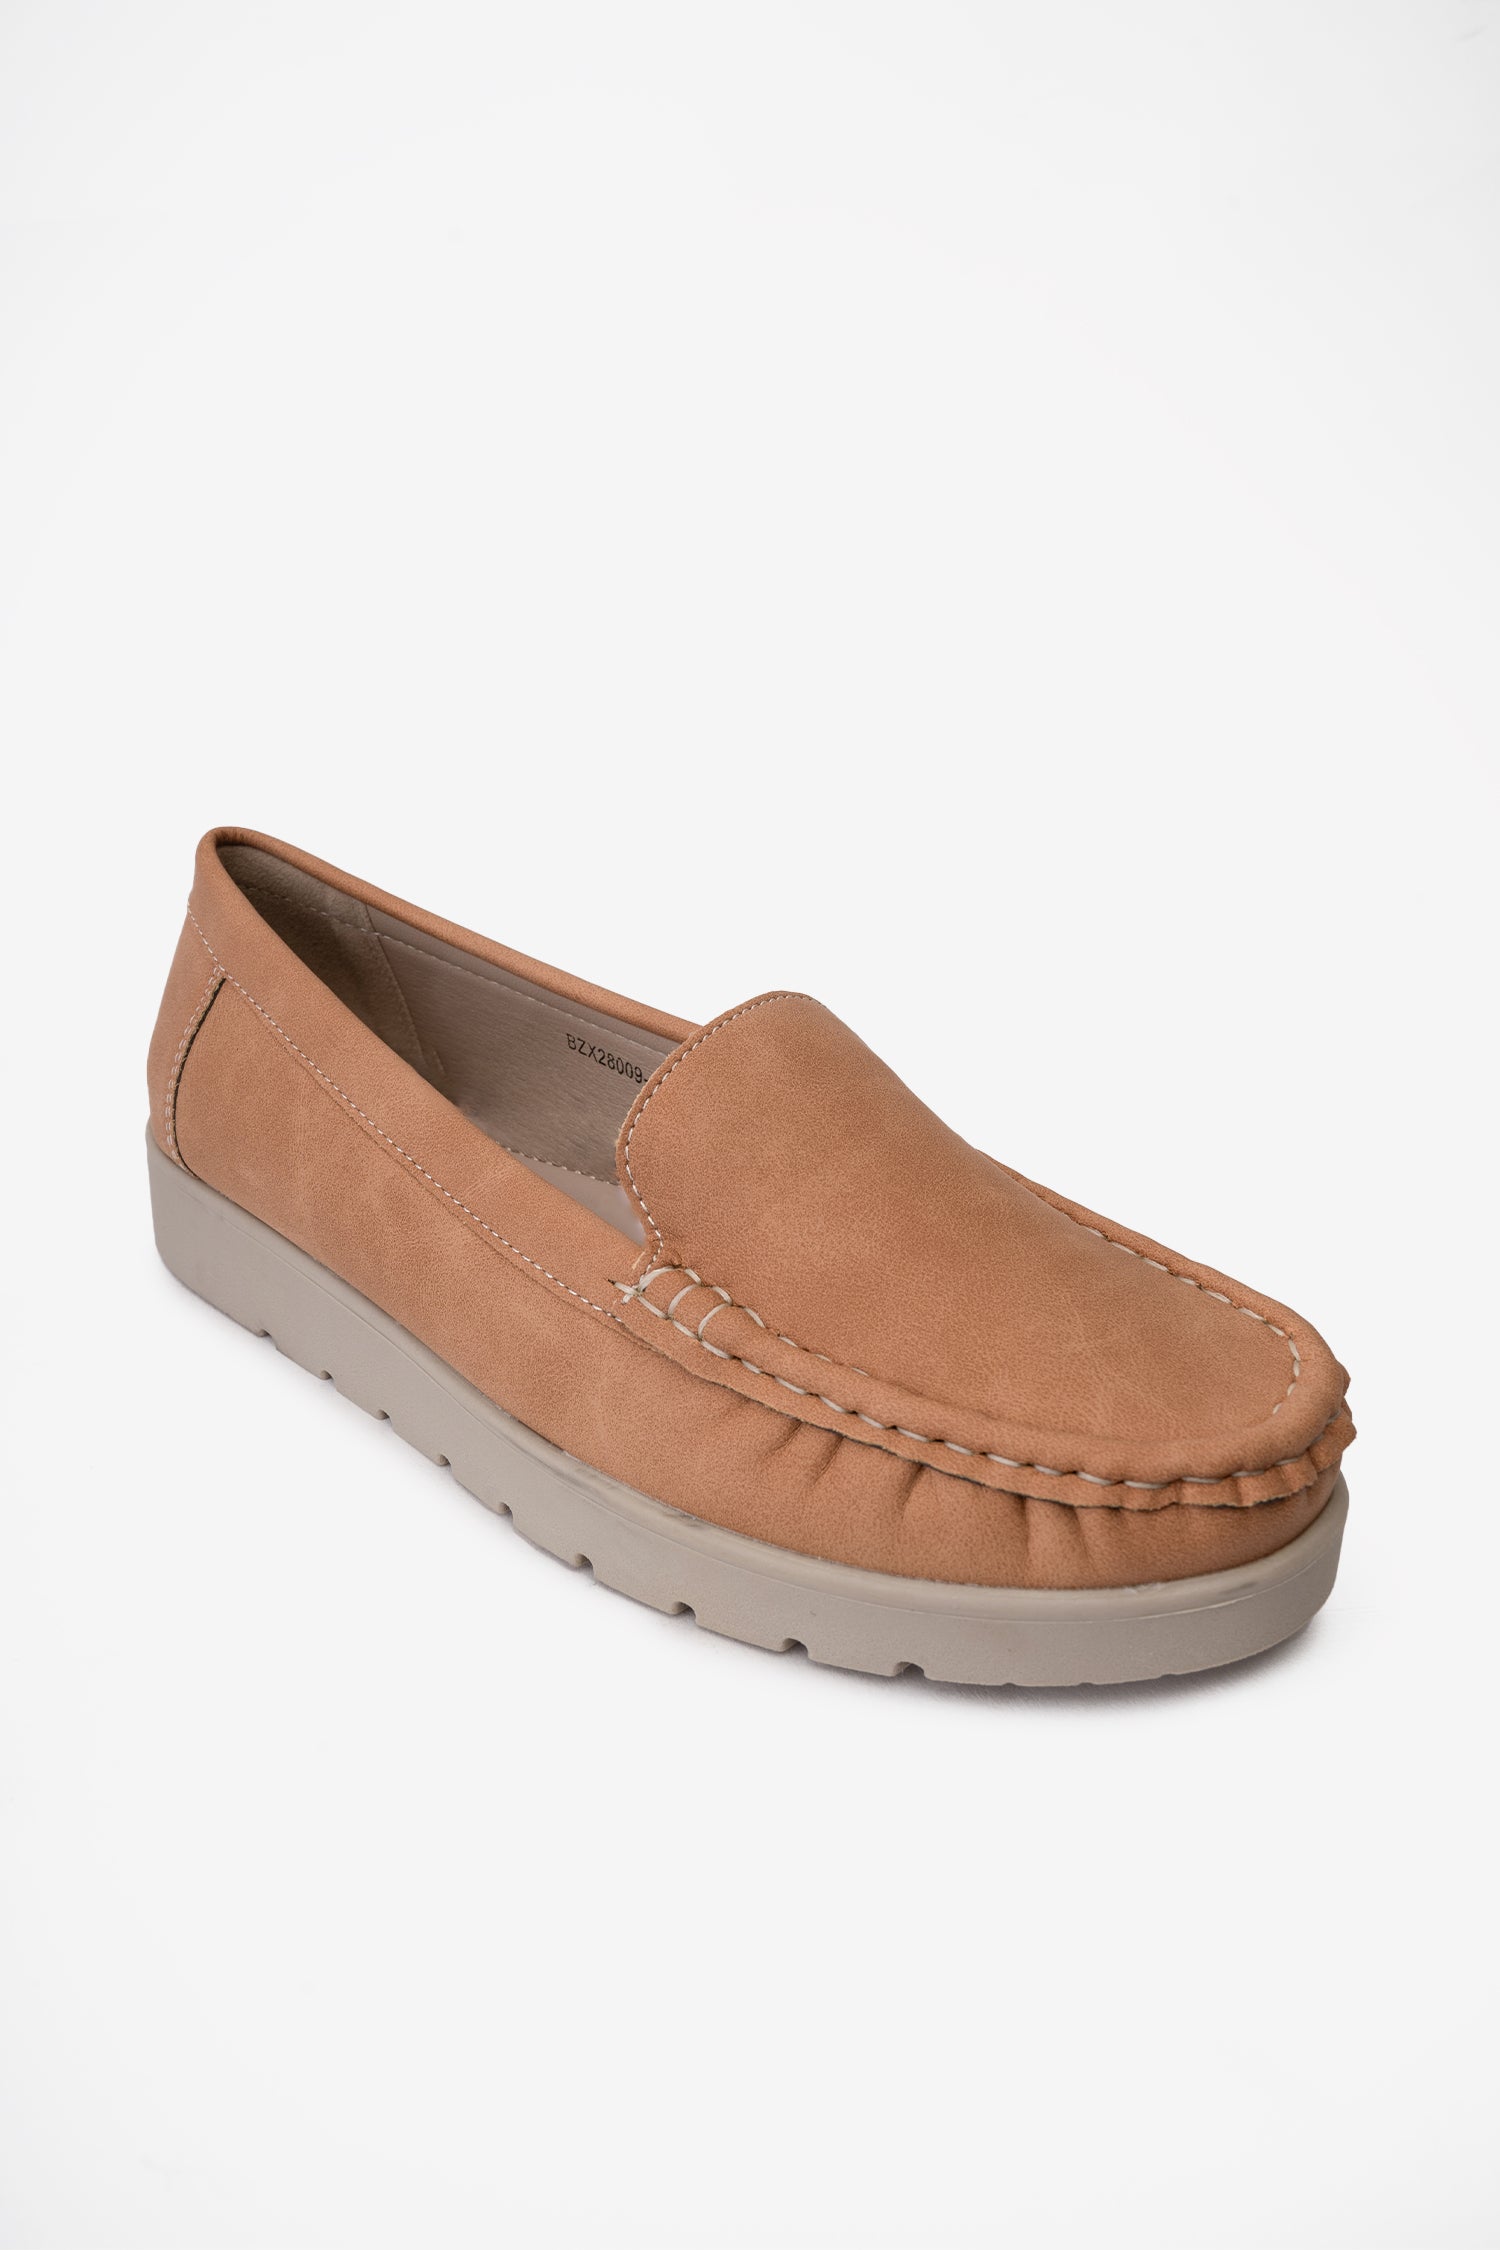 Mocasín Mujer Camel María Chinitown Chinitown